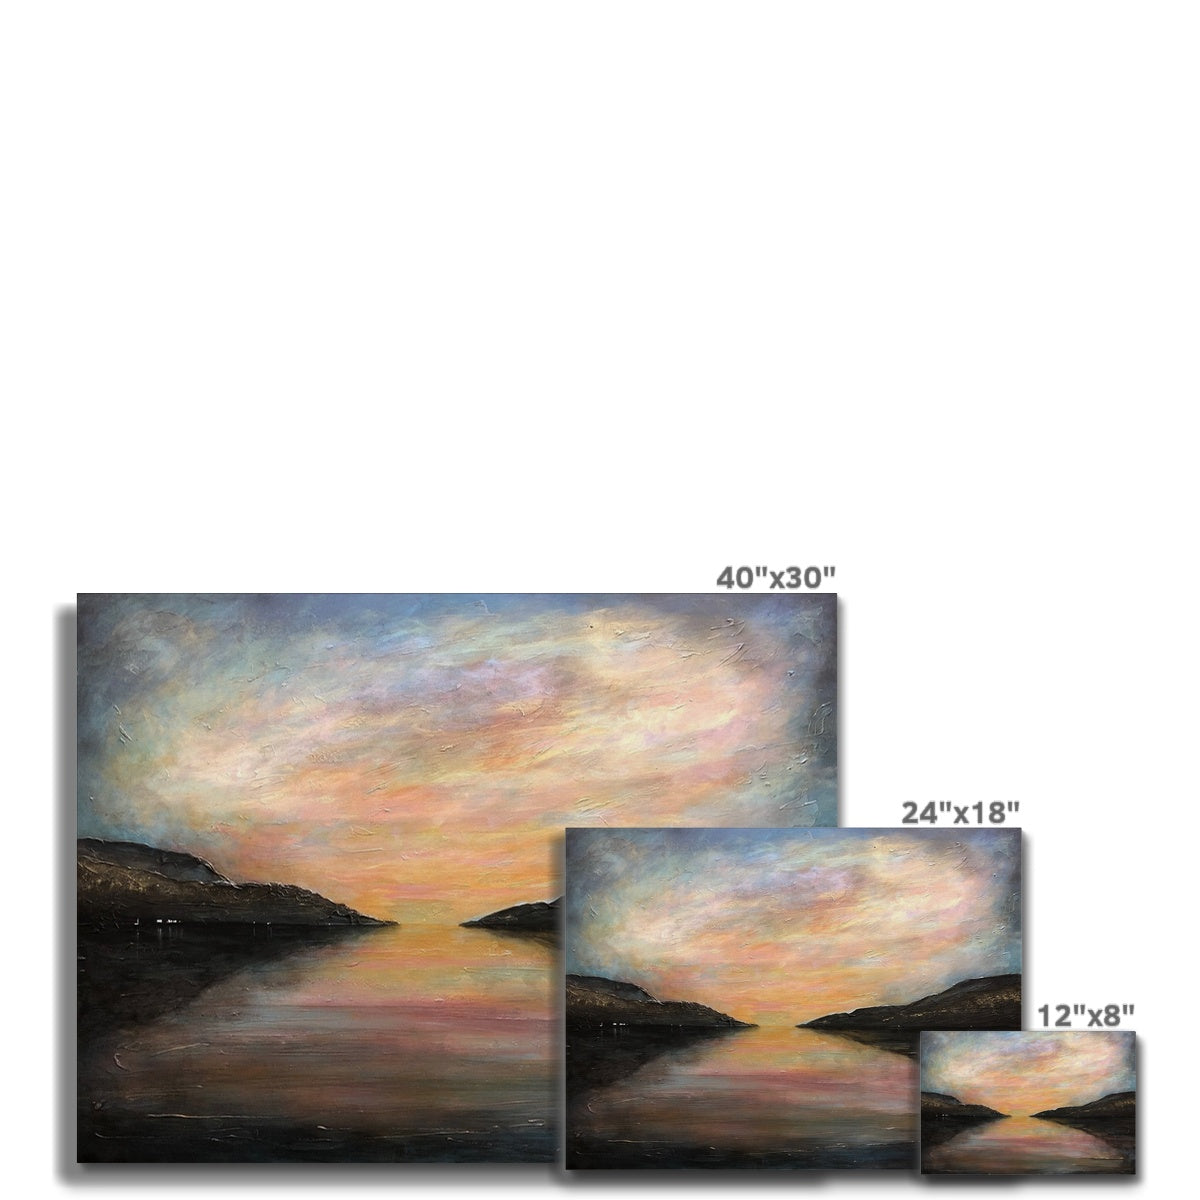 Loch Ness Glow Painting | Canvas From Scotland-Contemporary Stretched Canvas Prints-Scottish Lochs & Mountains Art Gallery-Paintings, Prints, Homeware, Art Gifts From Scotland By Scottish Artist Kevin Hunter